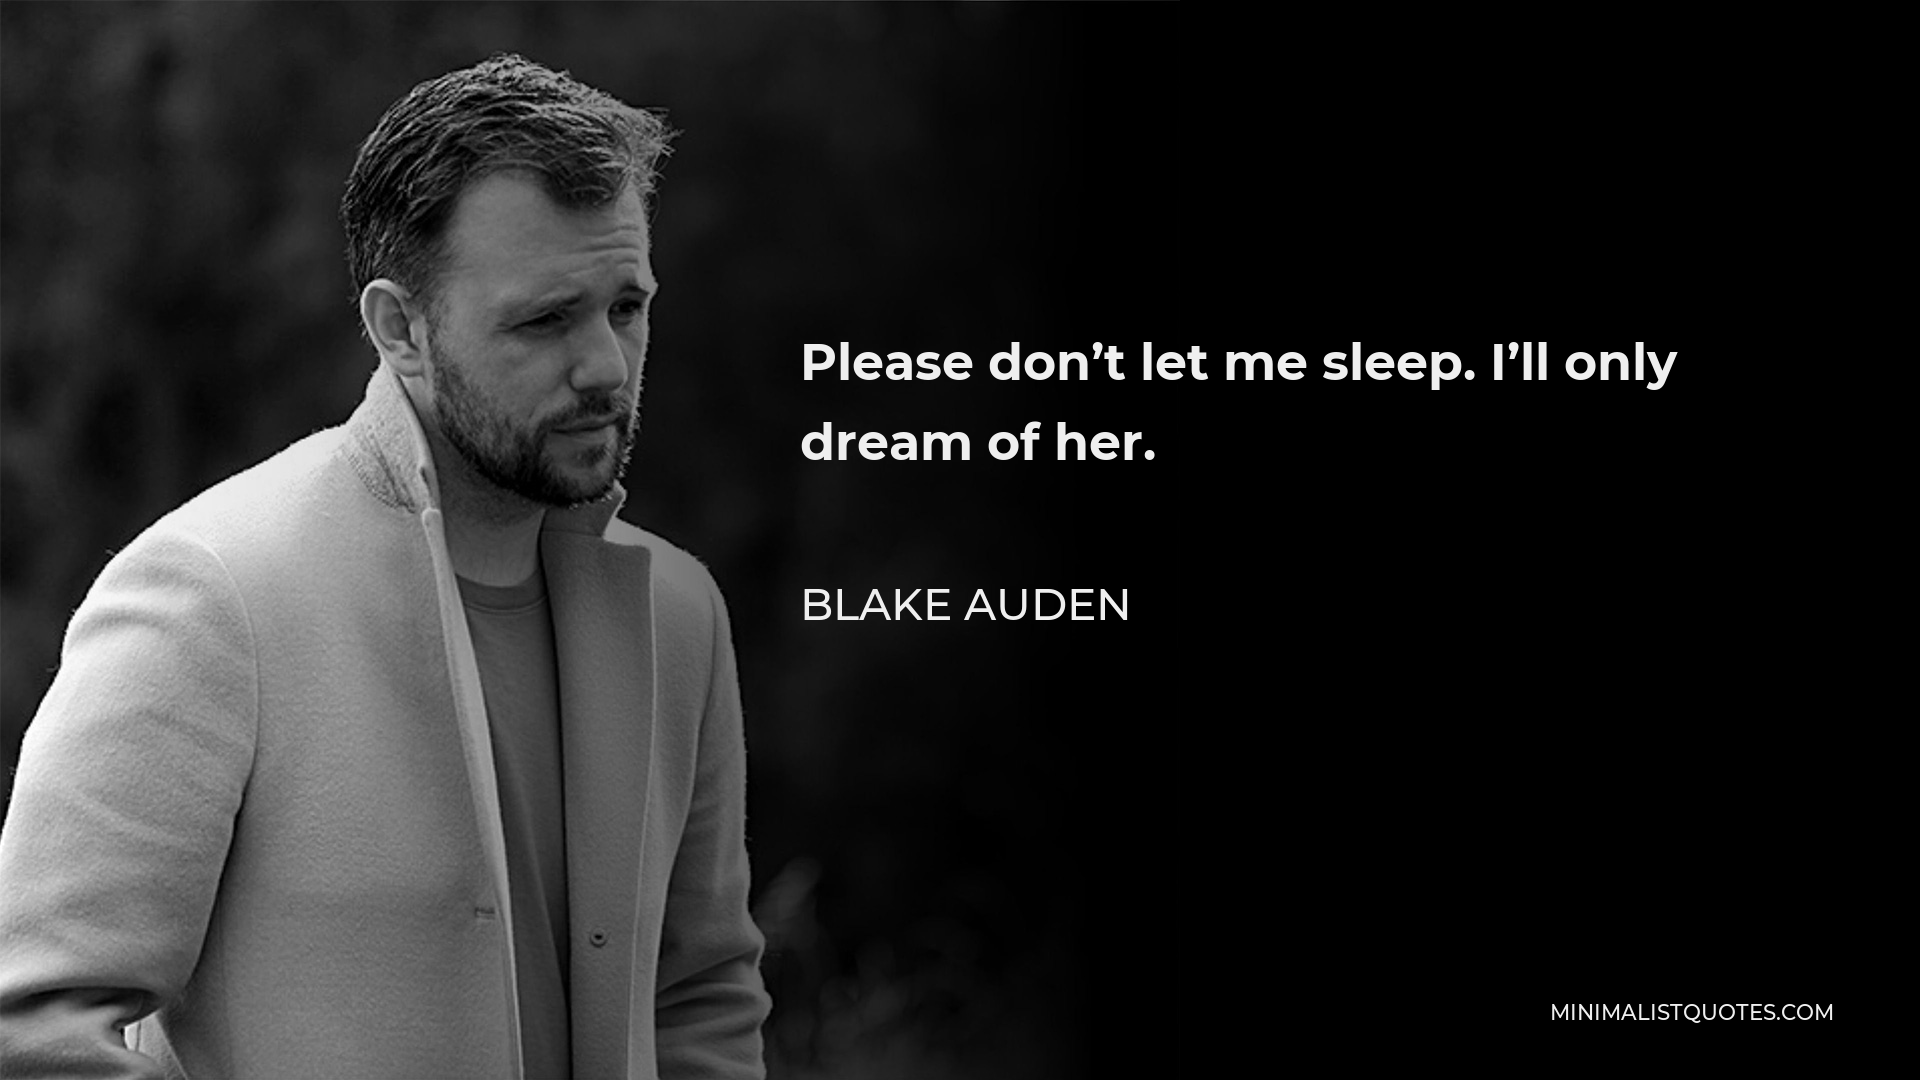 Blake Auden Quote - Please don’t let me sleep. I’ll only dream of her.